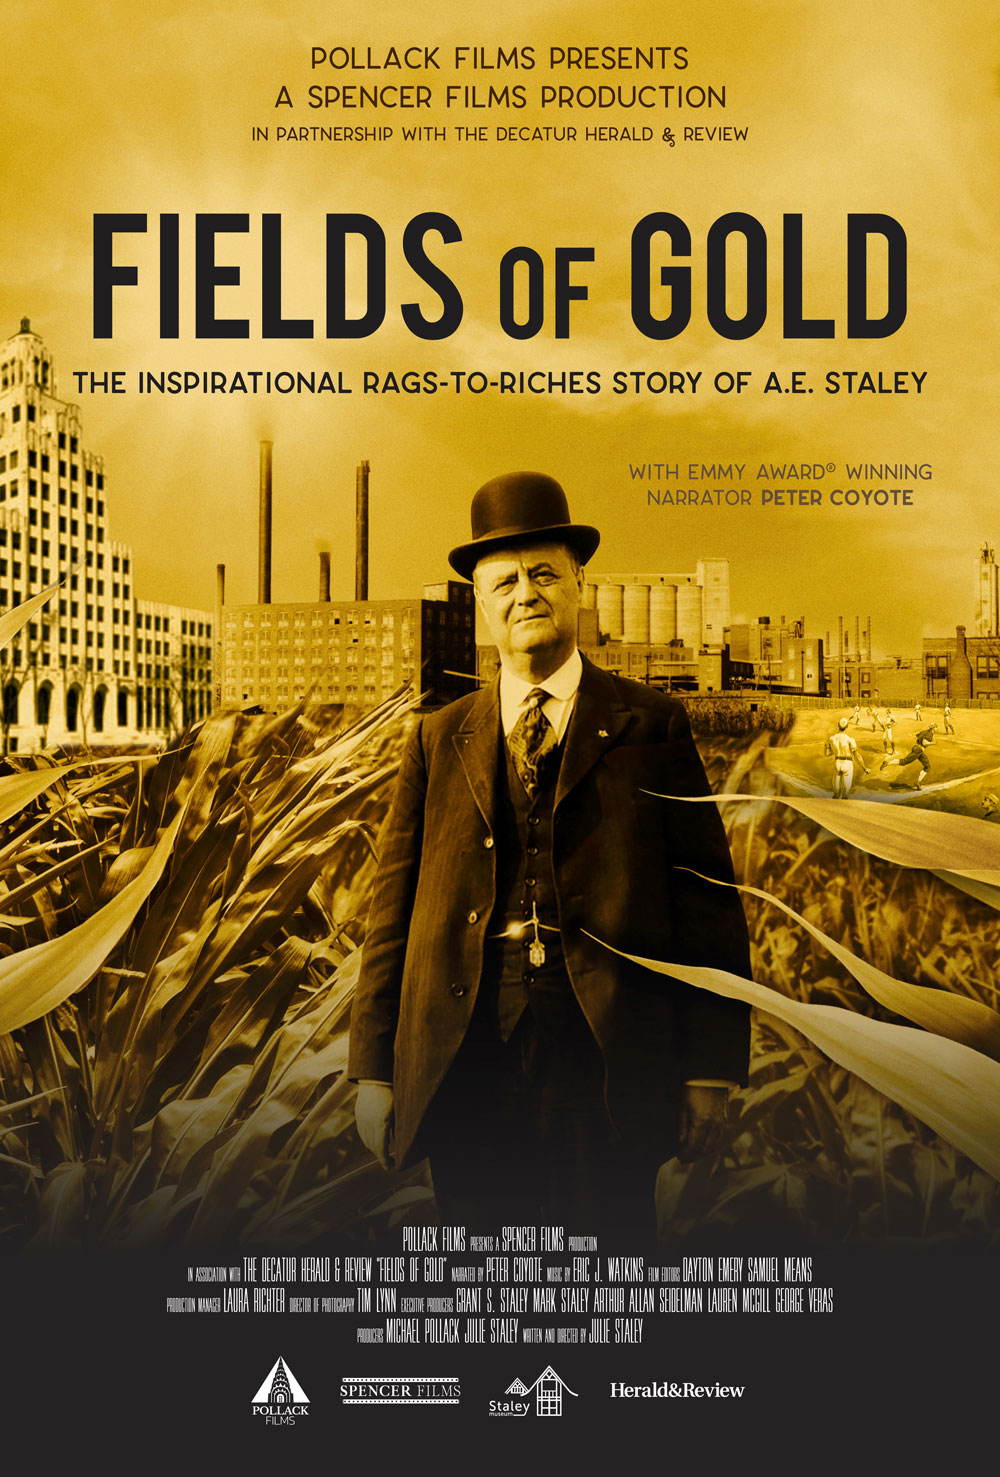 Fields of Gold Movie Produced and Directed by Spencer Films